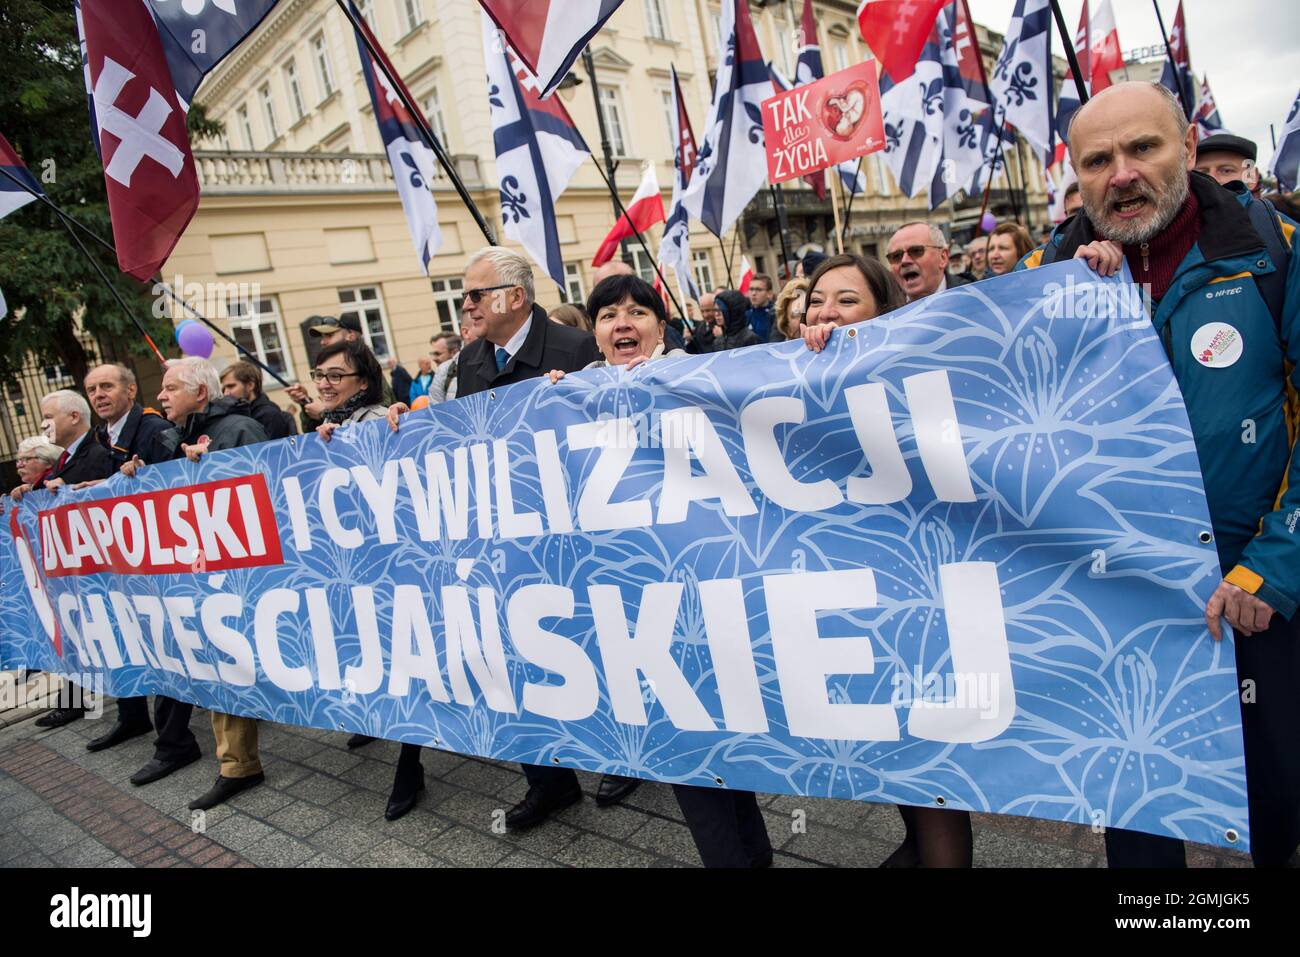 Warsaw, Poland. 19th Sep, 2021. Marchers wave flags and hold a banner during the demonstration.Thousands of people took part in the XVI National March of Life and Family (Narodowy Marsz Zycia i Rodziny) in Warsaw which was held under the slogan 'Dad - be, lead, protect'. As the organizers of the event announced earlier, it was aimed at manifesting pro-family attitudes and pro-life values. The event's main organizer was the Center of Life and Family. (Photo by Attila Husejnow/SOPA Images/Sipa USA) Credit: Sipa USA/Alamy Live News Stock Photo